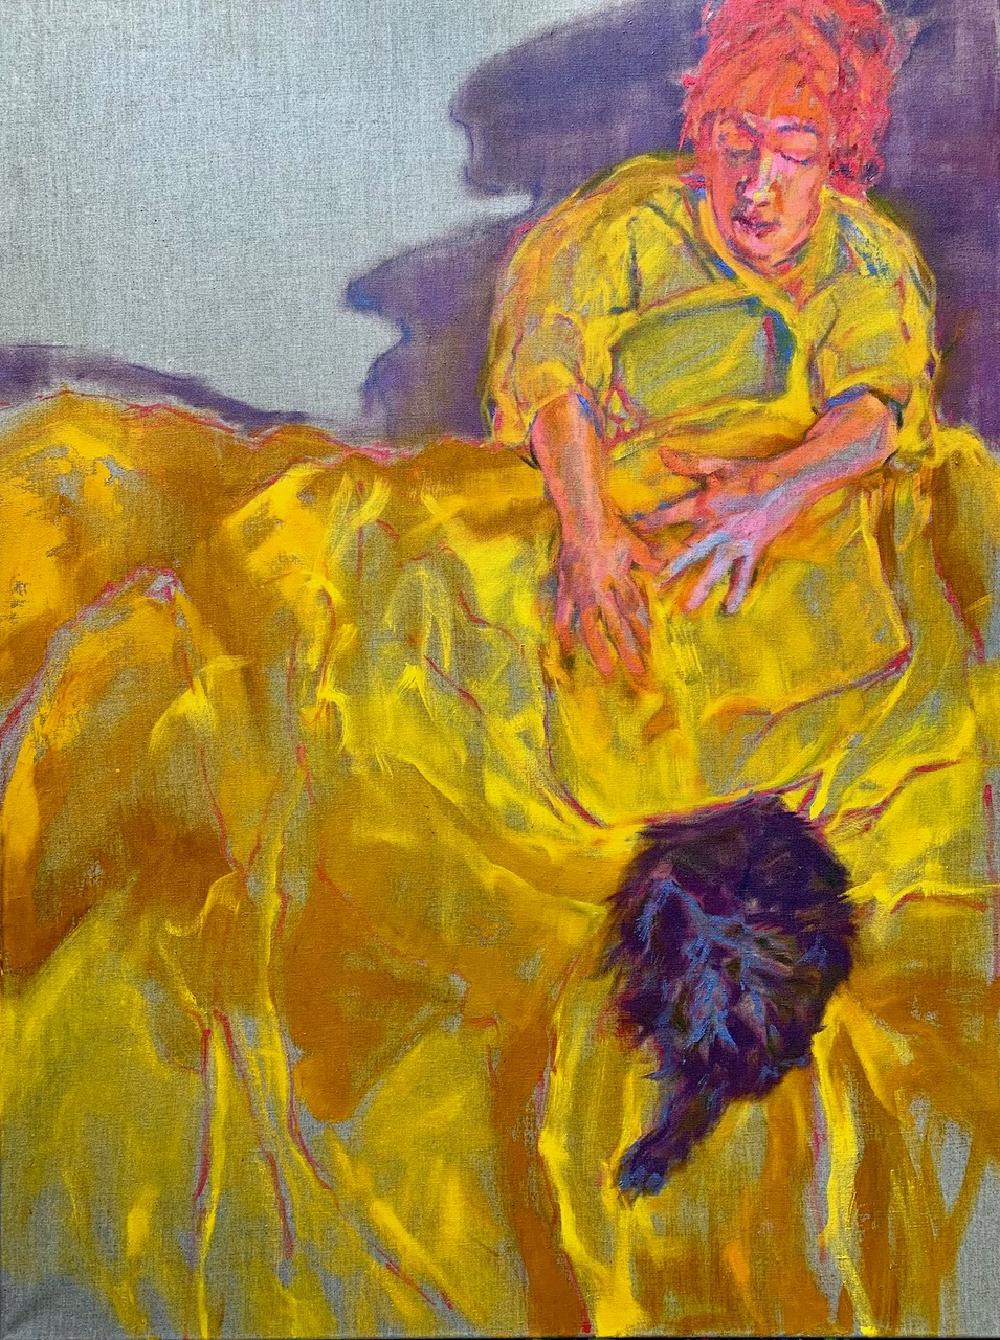 a woman with a yellow dress on, fabric flowy all over the image, and a furry ball in the bottom that might be a cat curled up